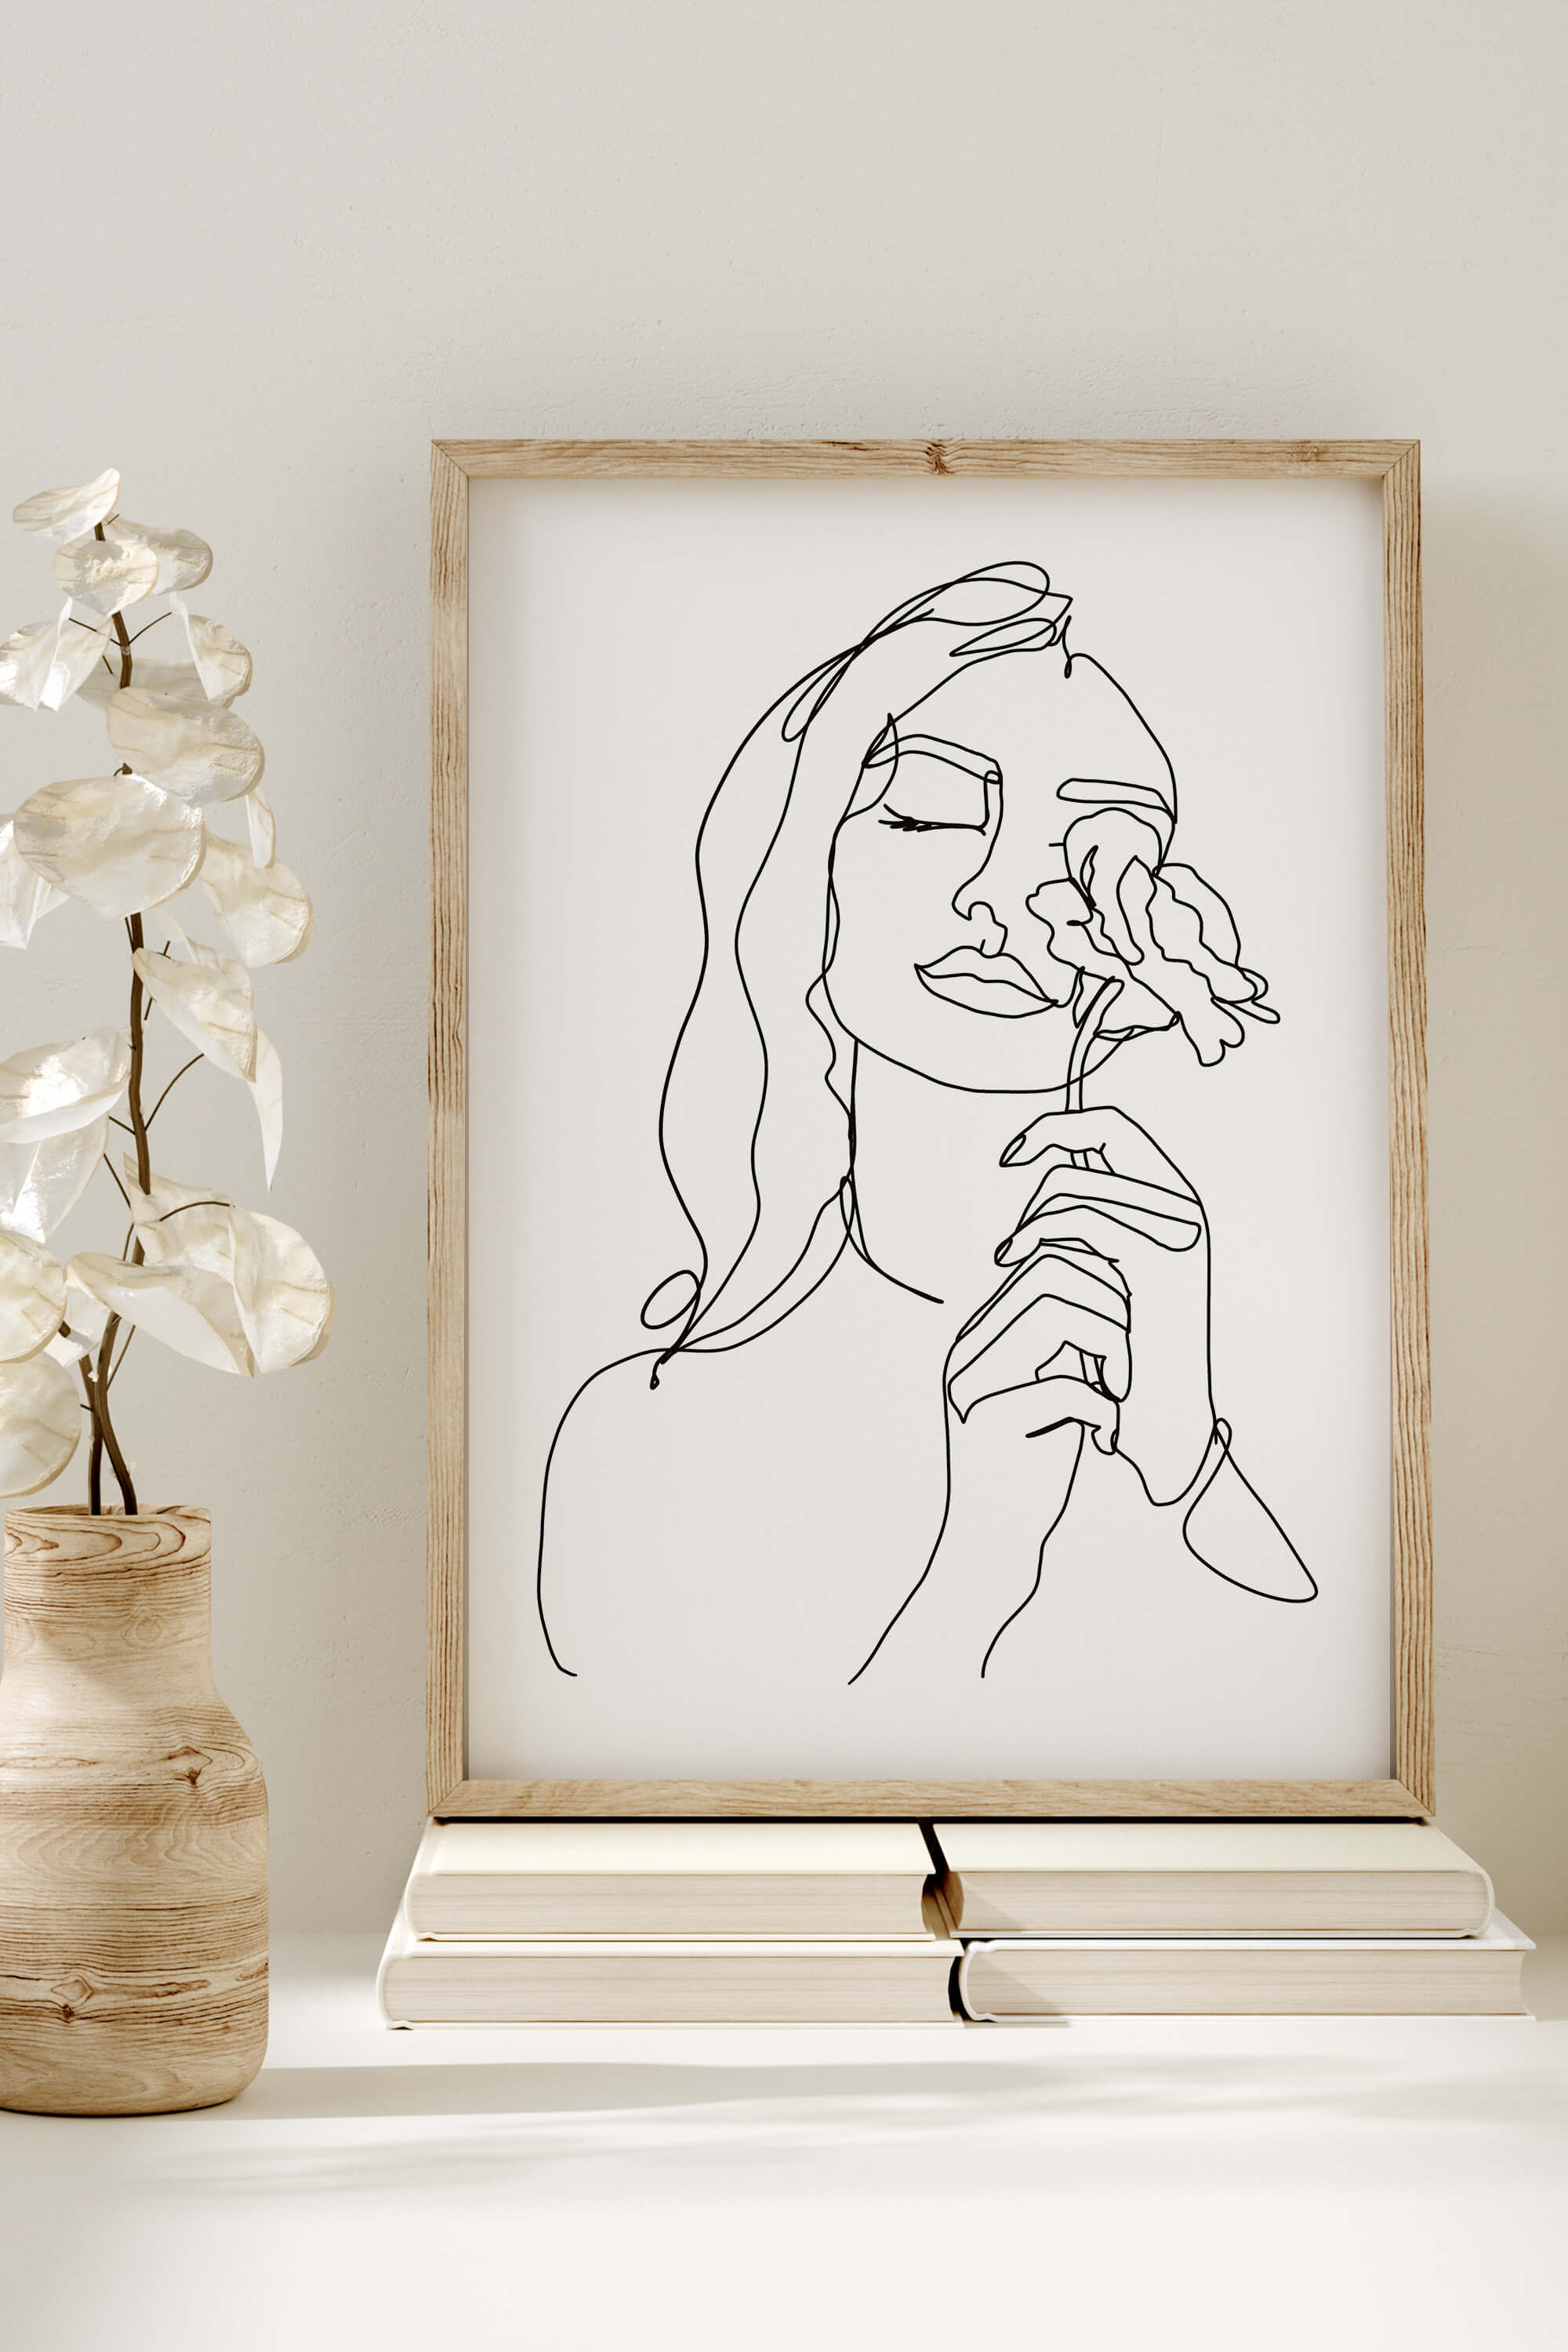 A monochrome line art print capturing the essence of feminine elegance. Delicate details and graceful strokes make this artwork a perfect blend of minimalism and femininity.